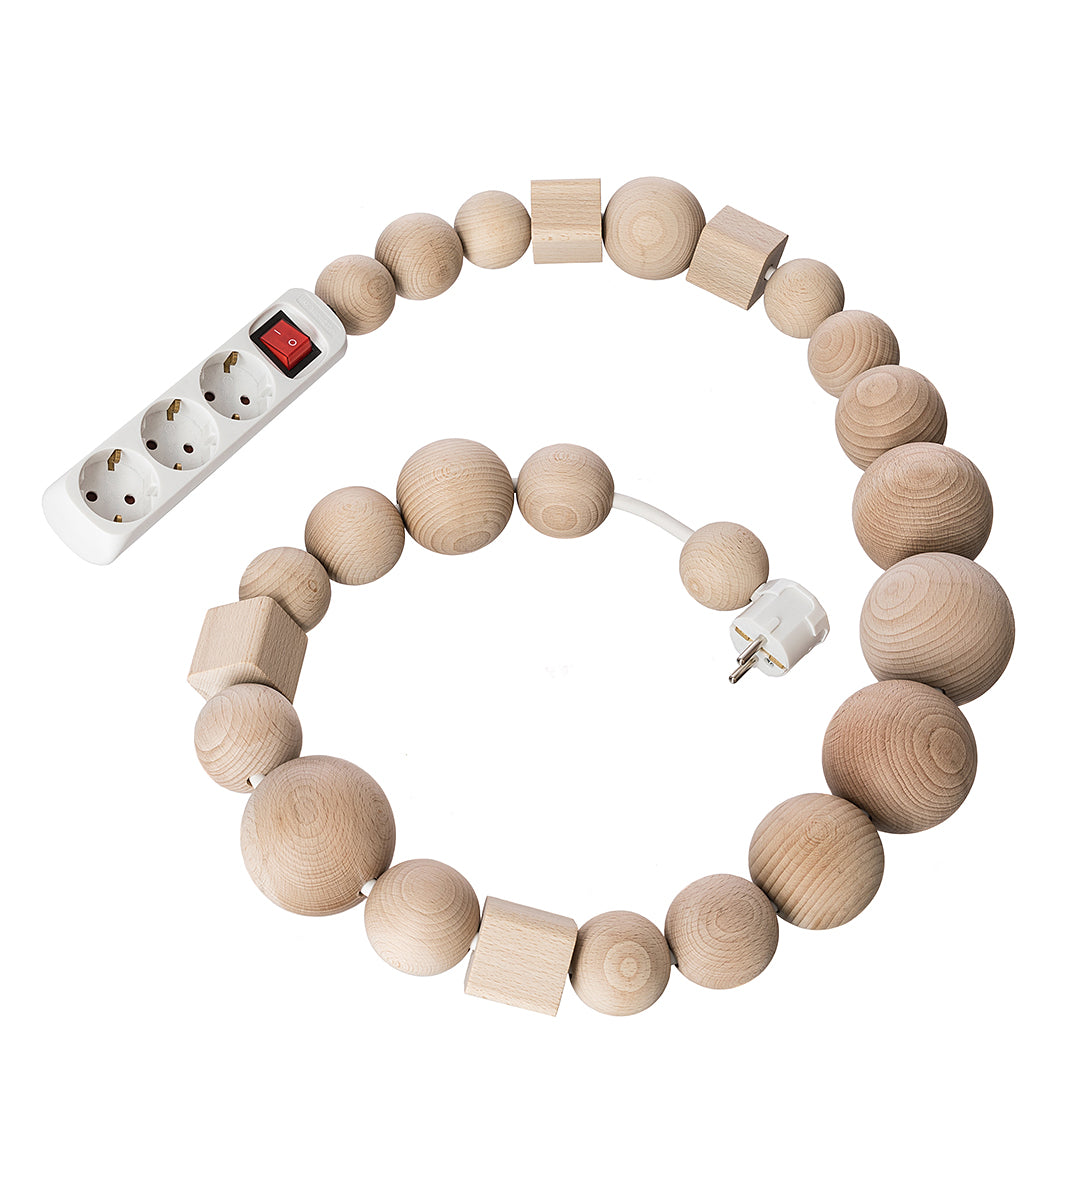 CABLE JEWELRY MULTIPLUG WOODEN ELEMENTS-